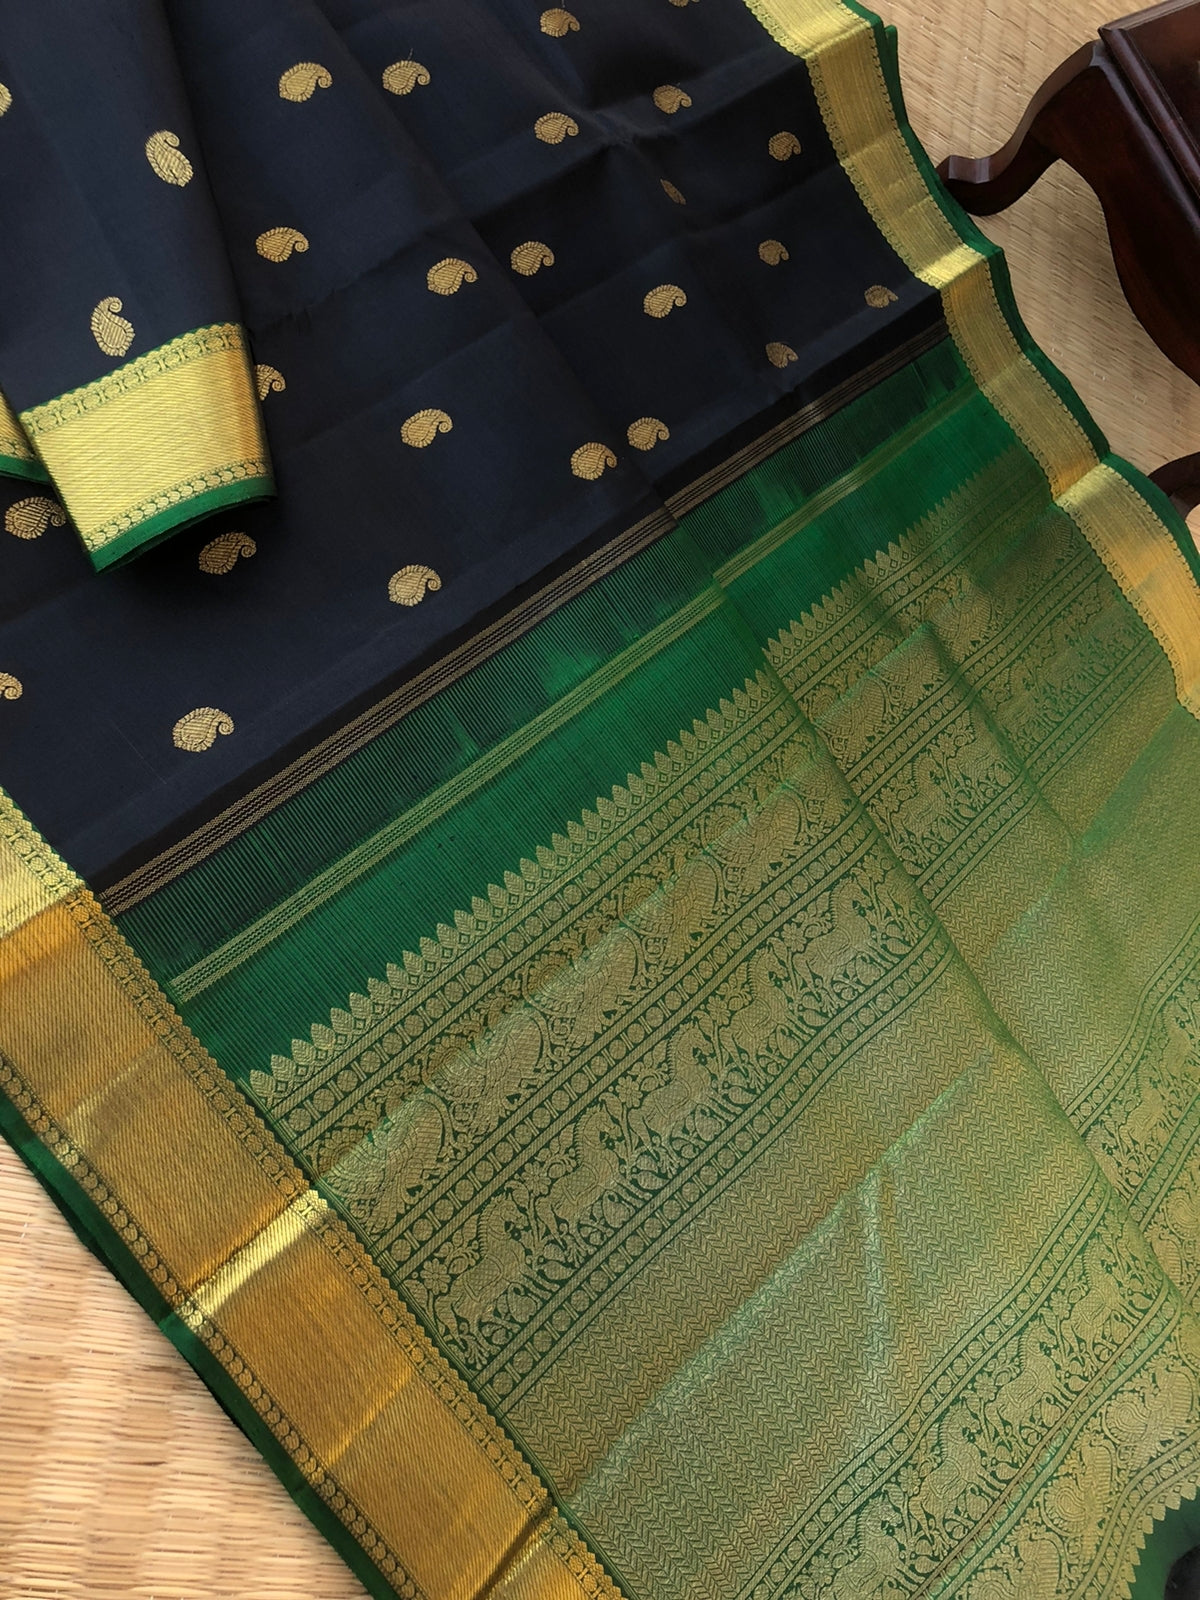 Swarnam - Black and Gold Kanchivarams - best of black and bottle green with gorgeous grand pallu and paisley buttas woven body